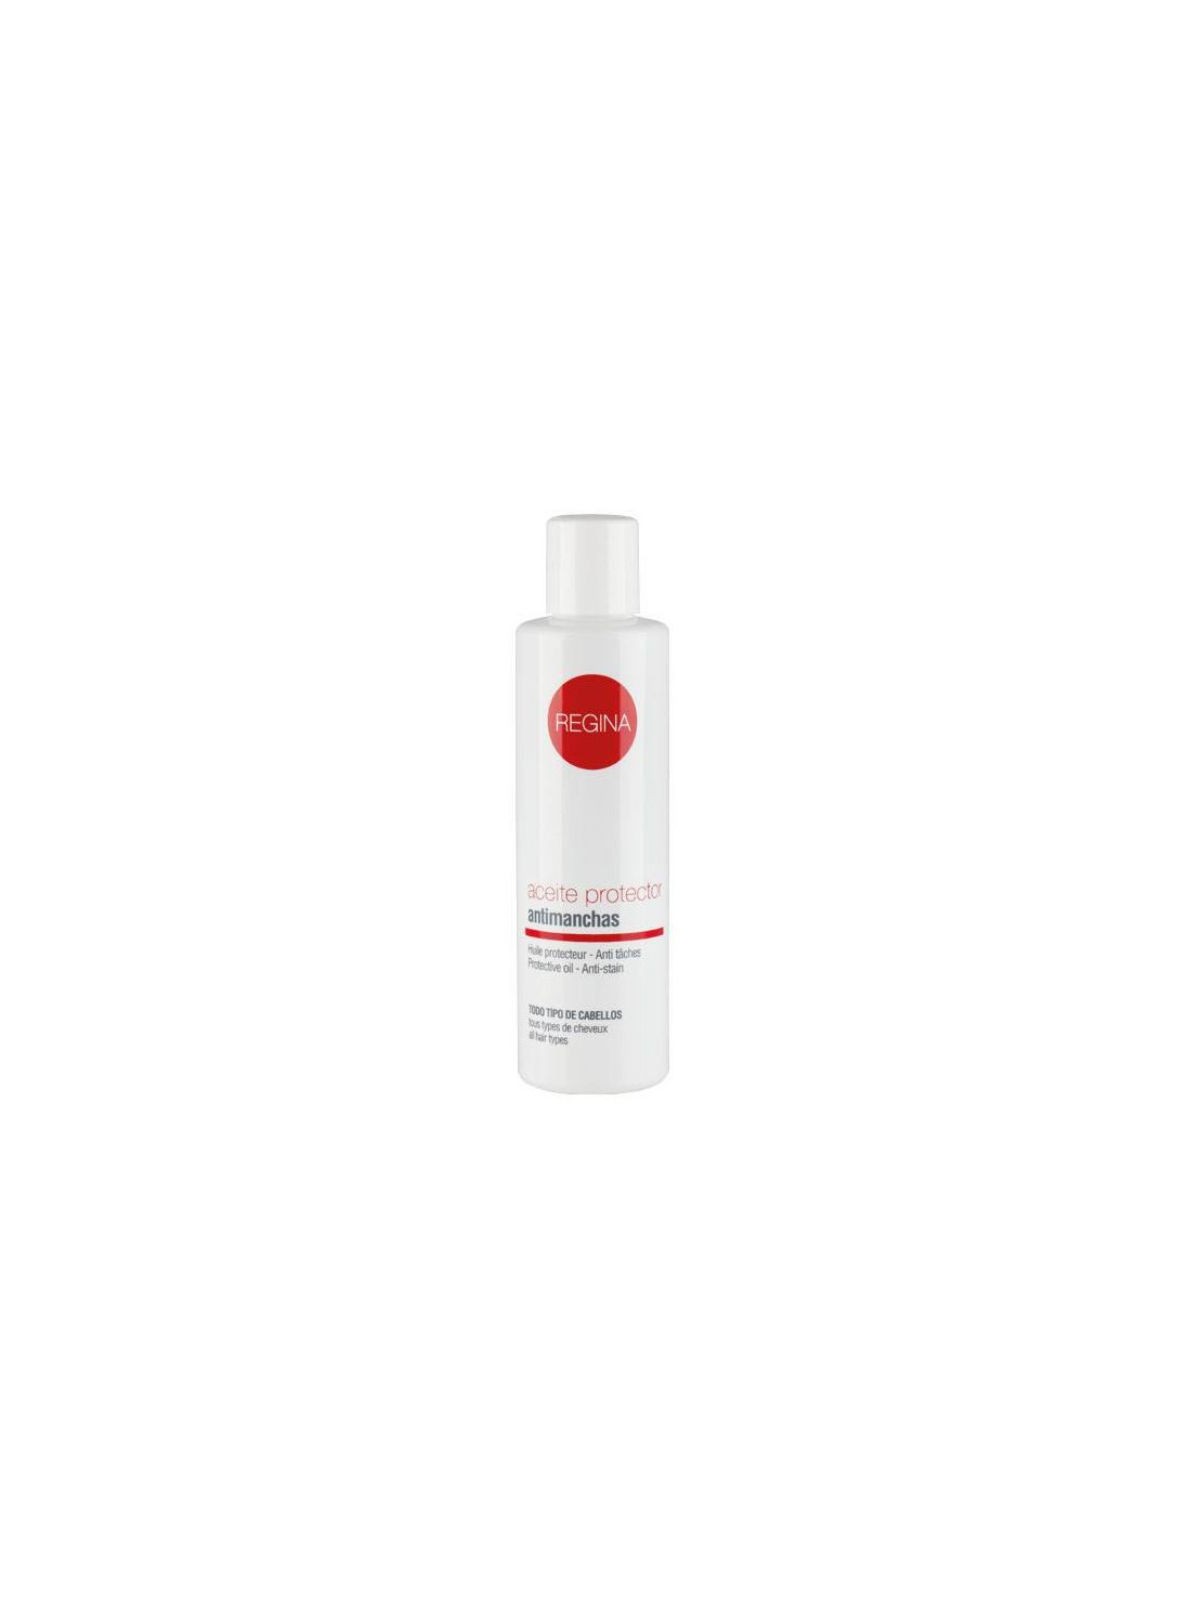 Aceite Protector Antimanchas 200 ml.